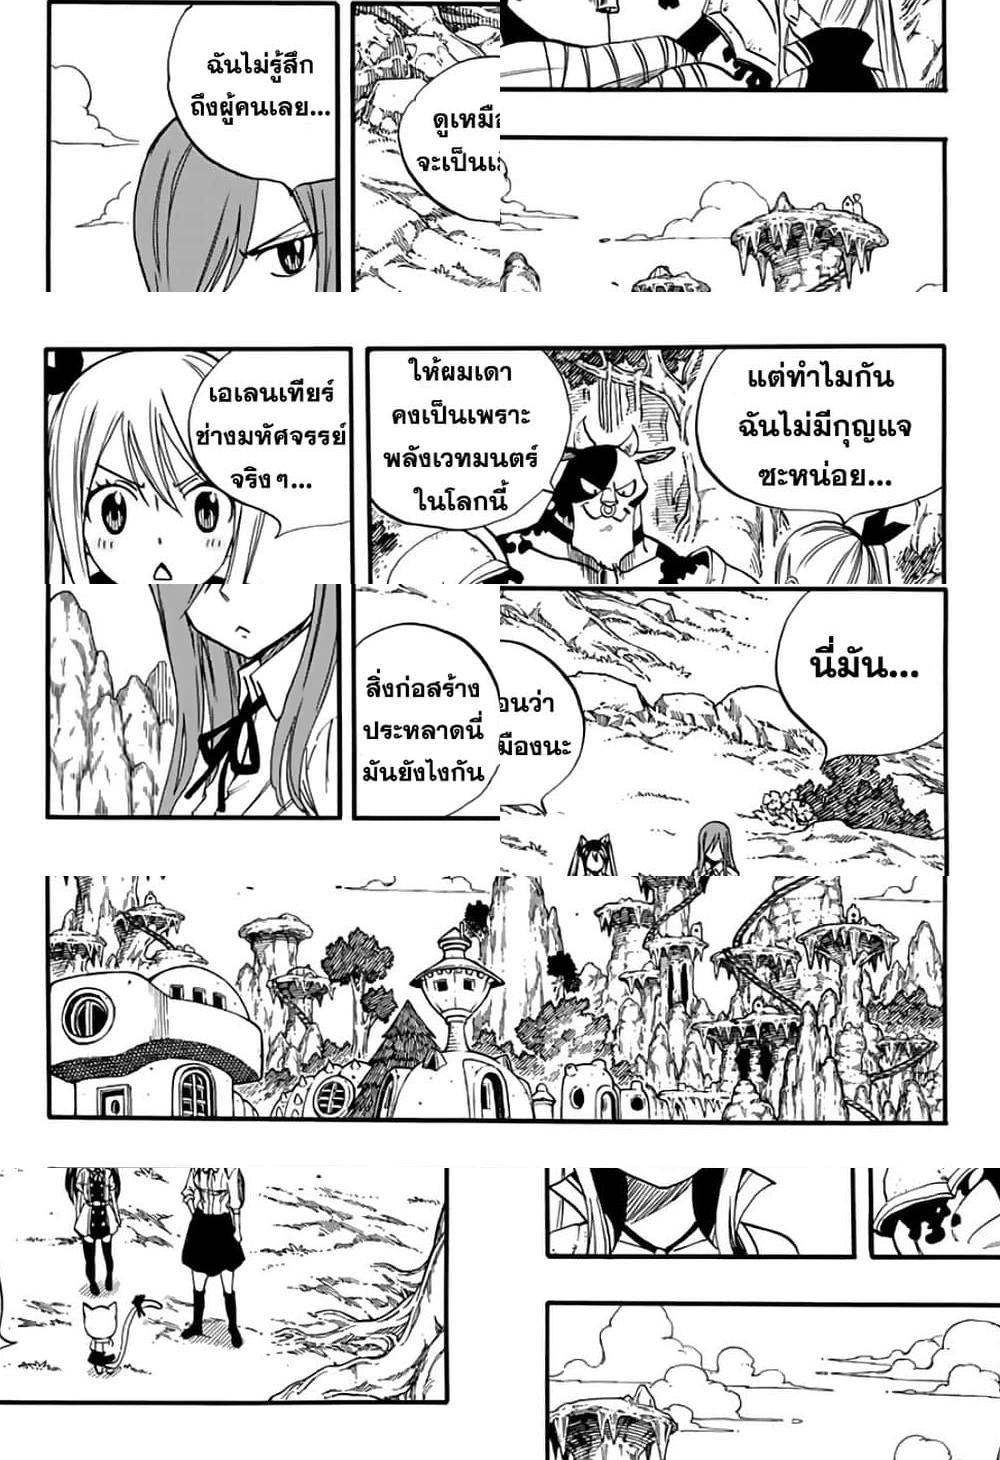 Fairy Tail: 100 Years Quest 69 TH